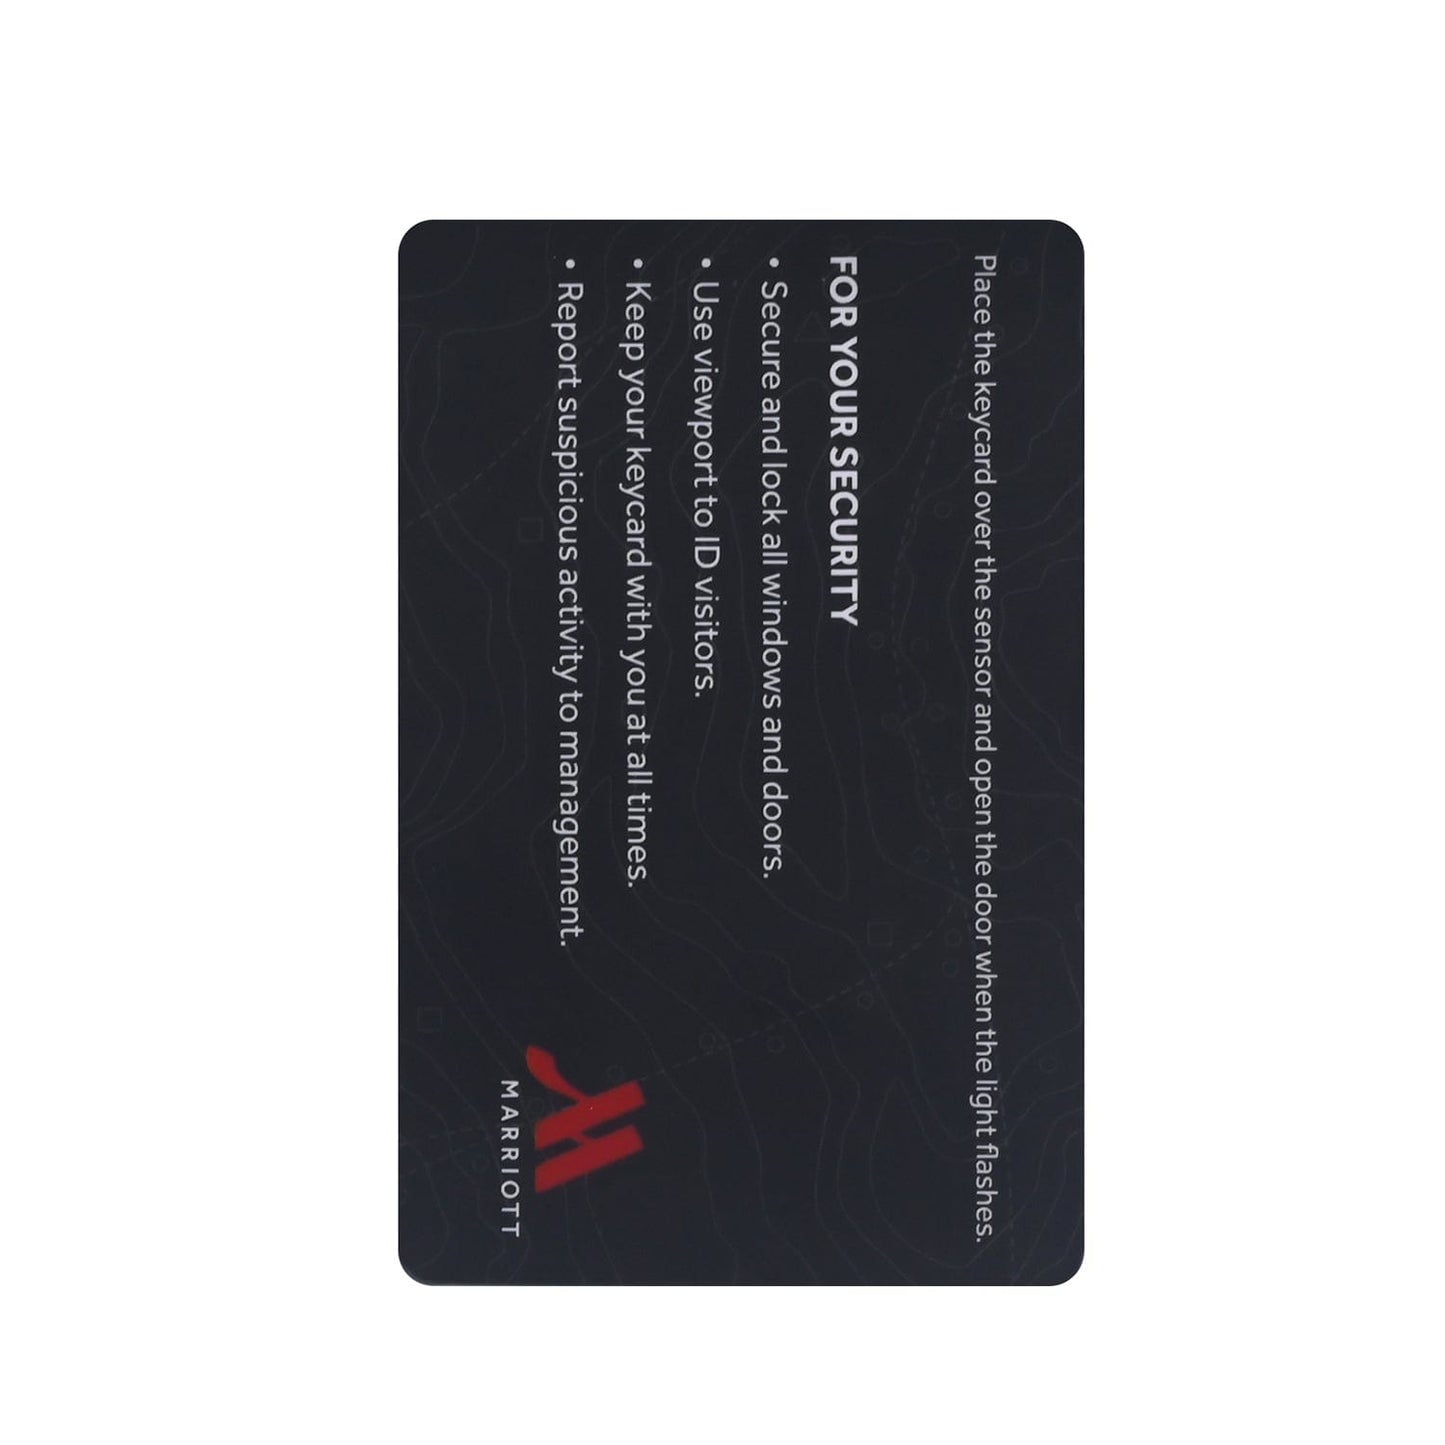 Assa Abloy Compatible Marriott Bonvoy Elite Member RFID Key Cards (Sold in boxes of 200)